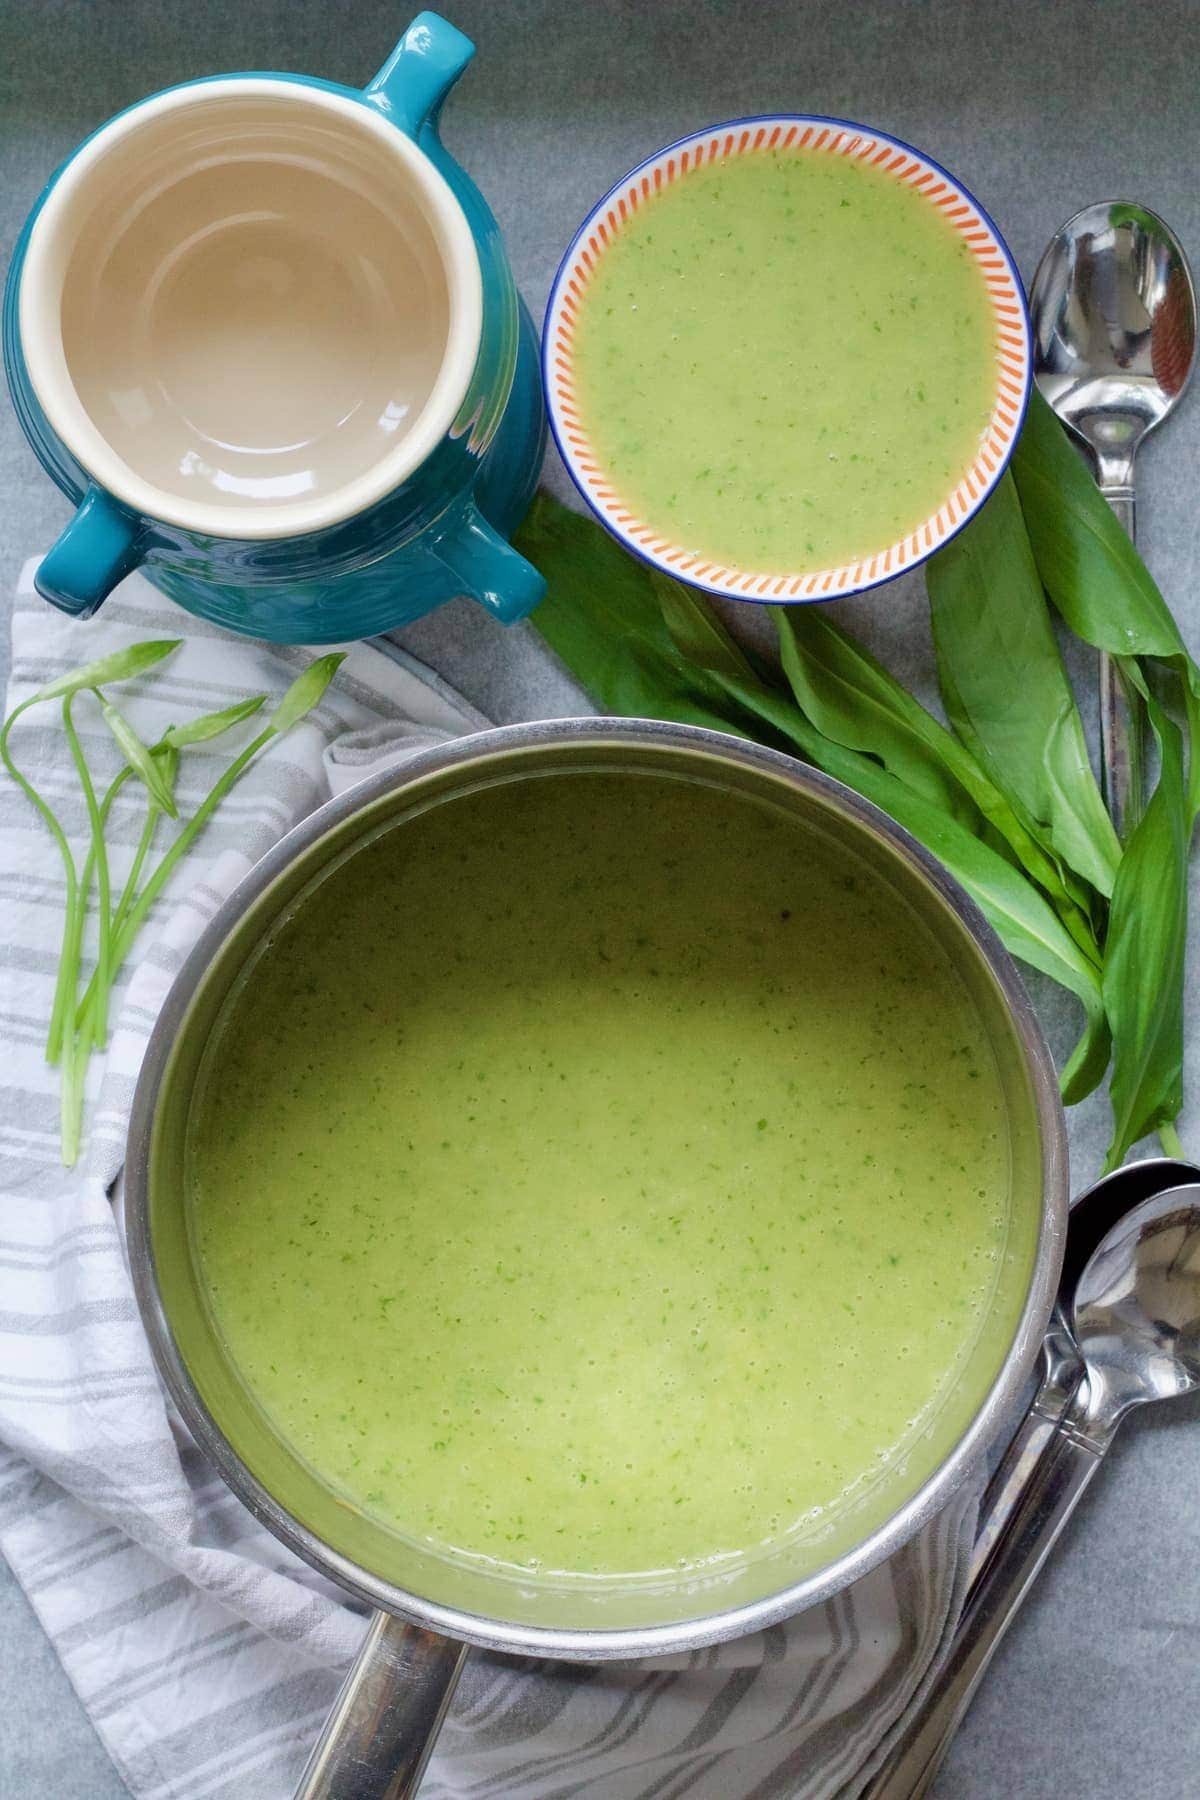 Pot with soup, bowls and wild garlic.